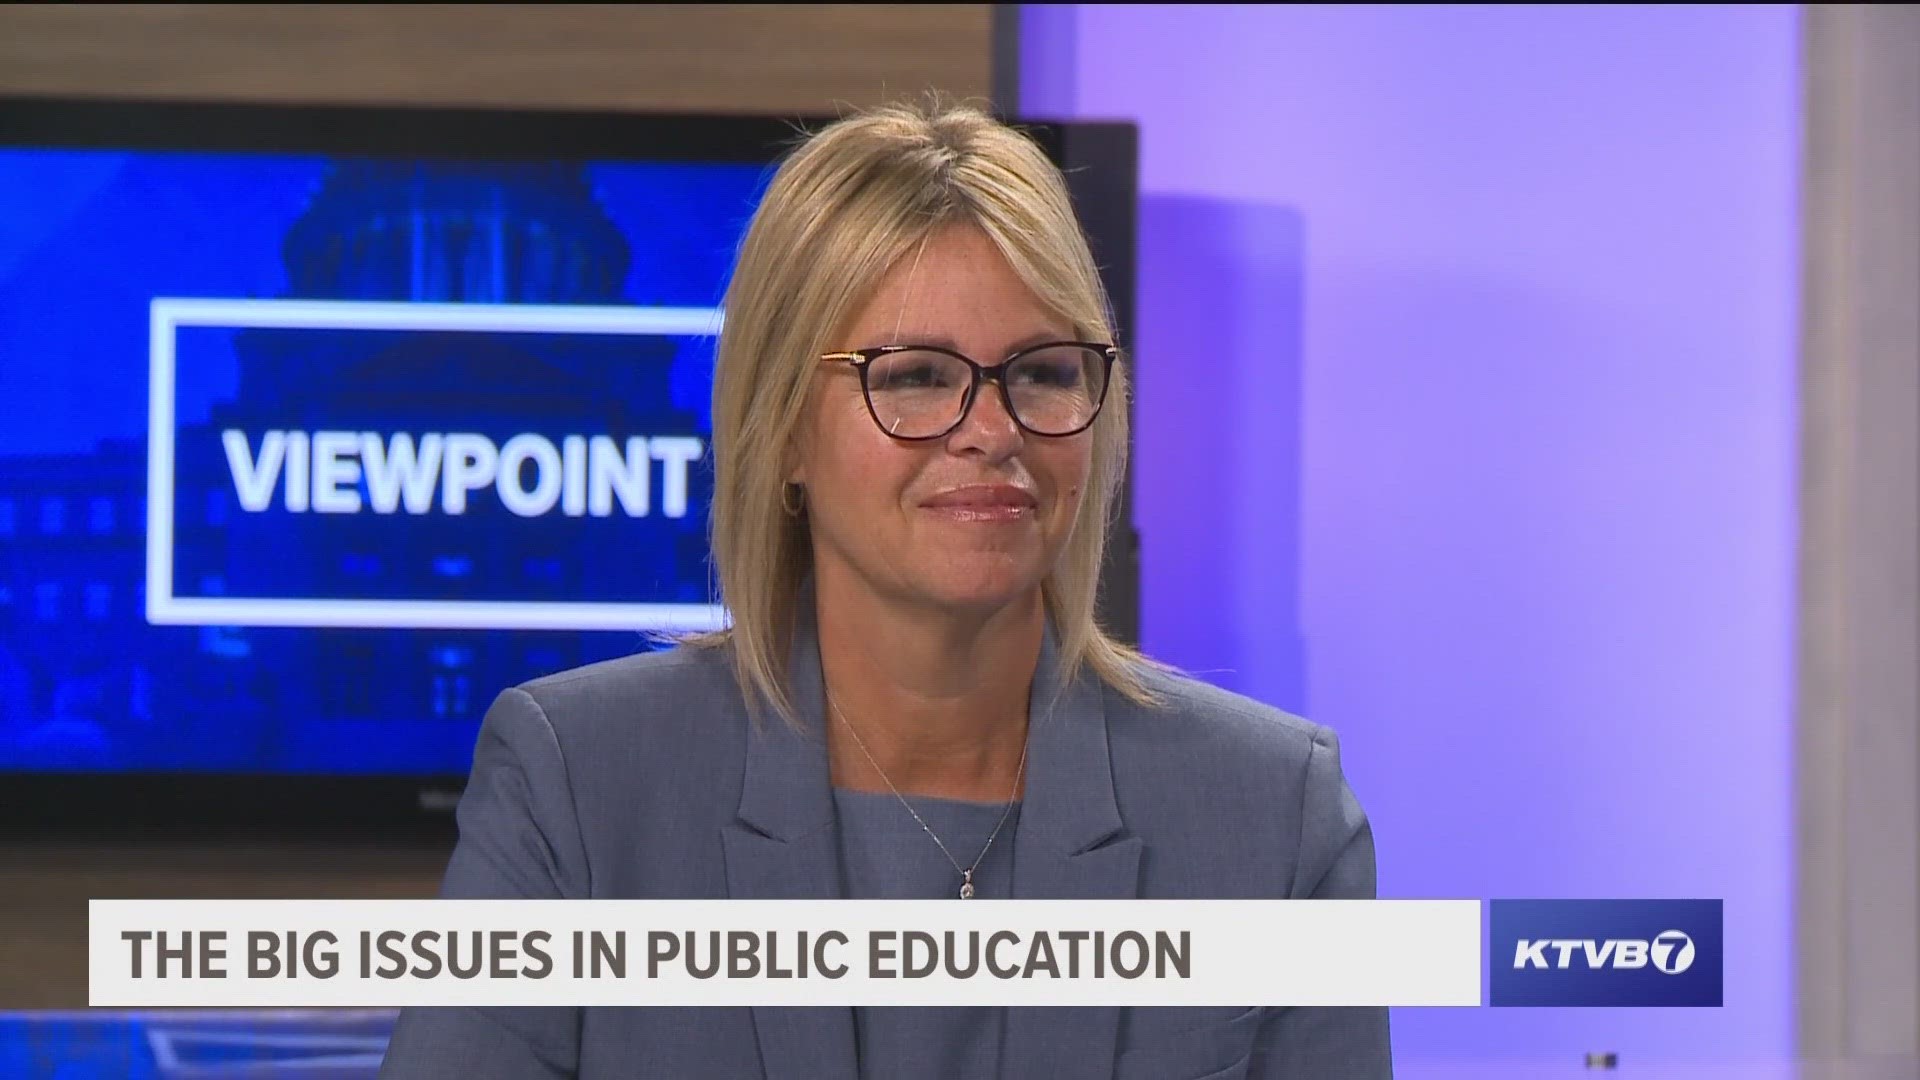 Idaho Supt. of Public Instruction Debbie Critchfield discusses the big issues in public education for the 2023-24 school year.